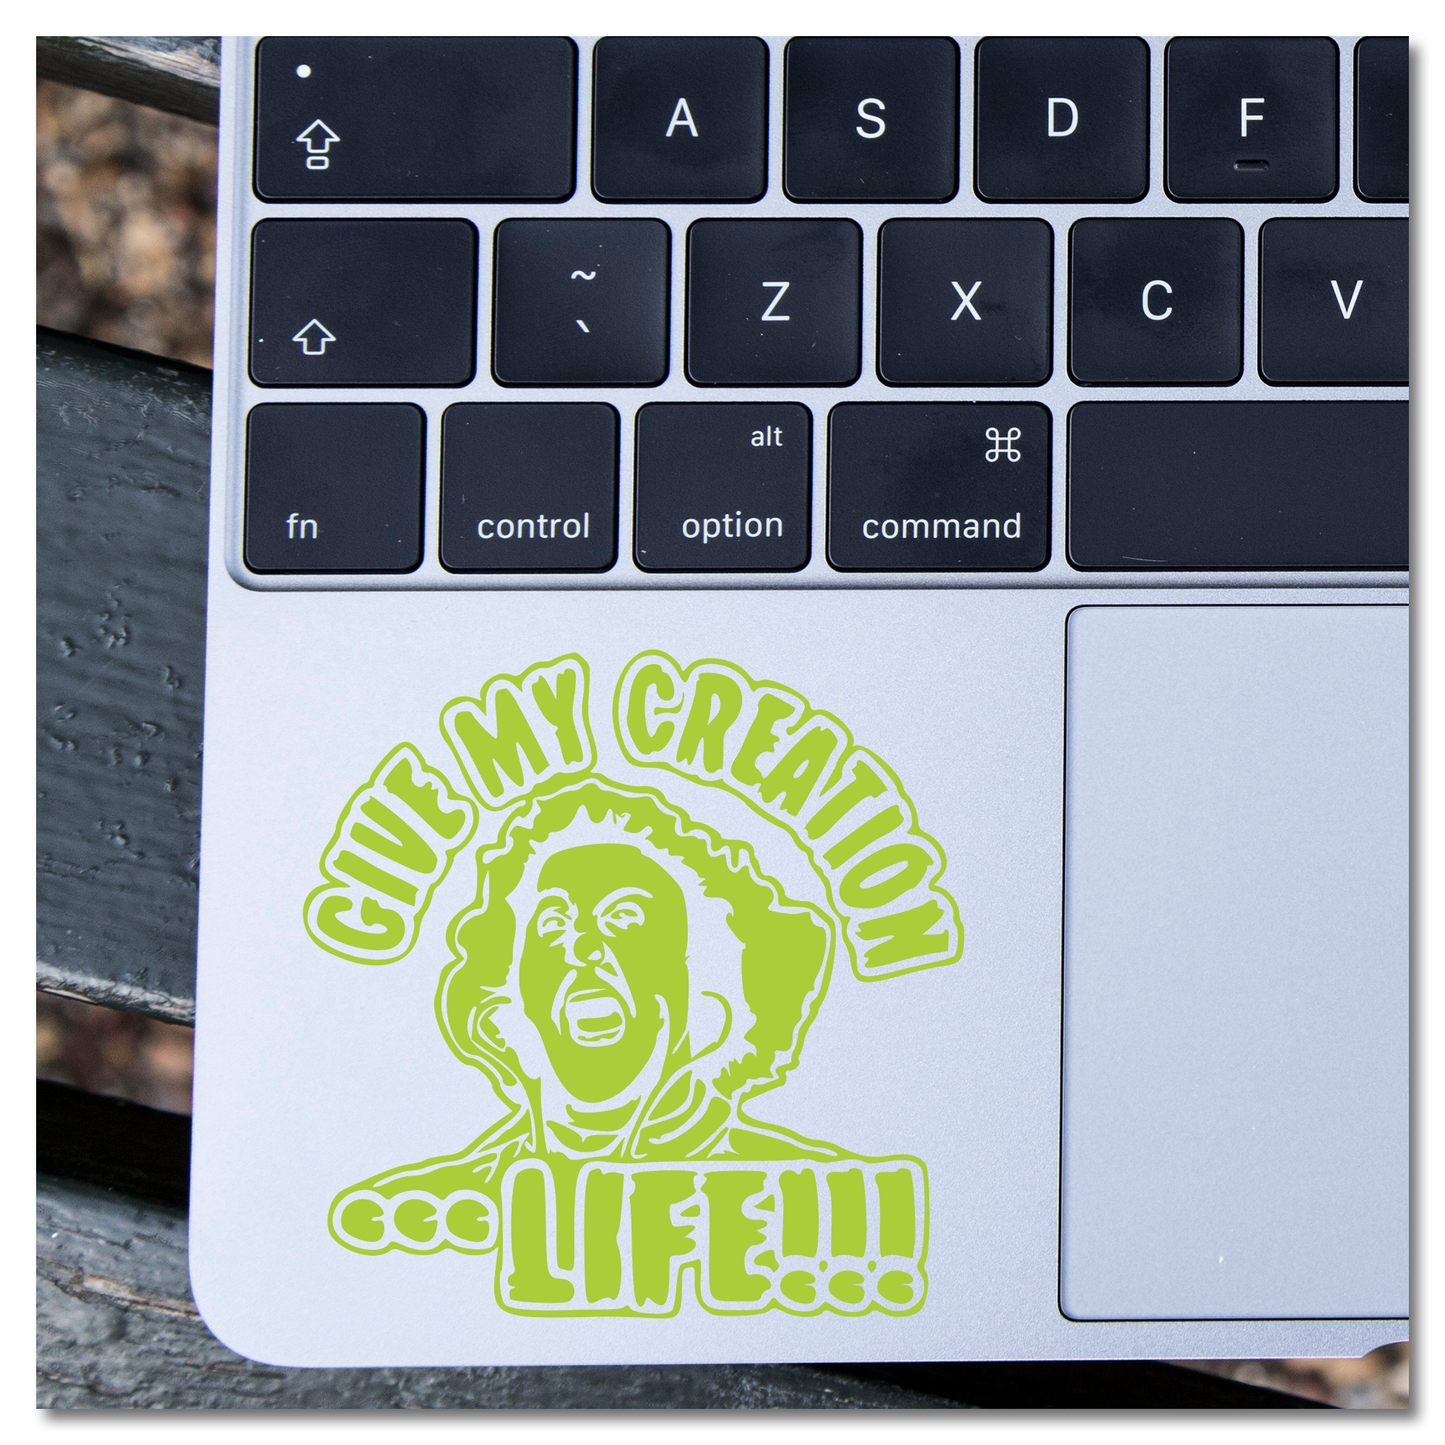 Young Frankenstein Give My Creation Life Vinyl Decal Sticker